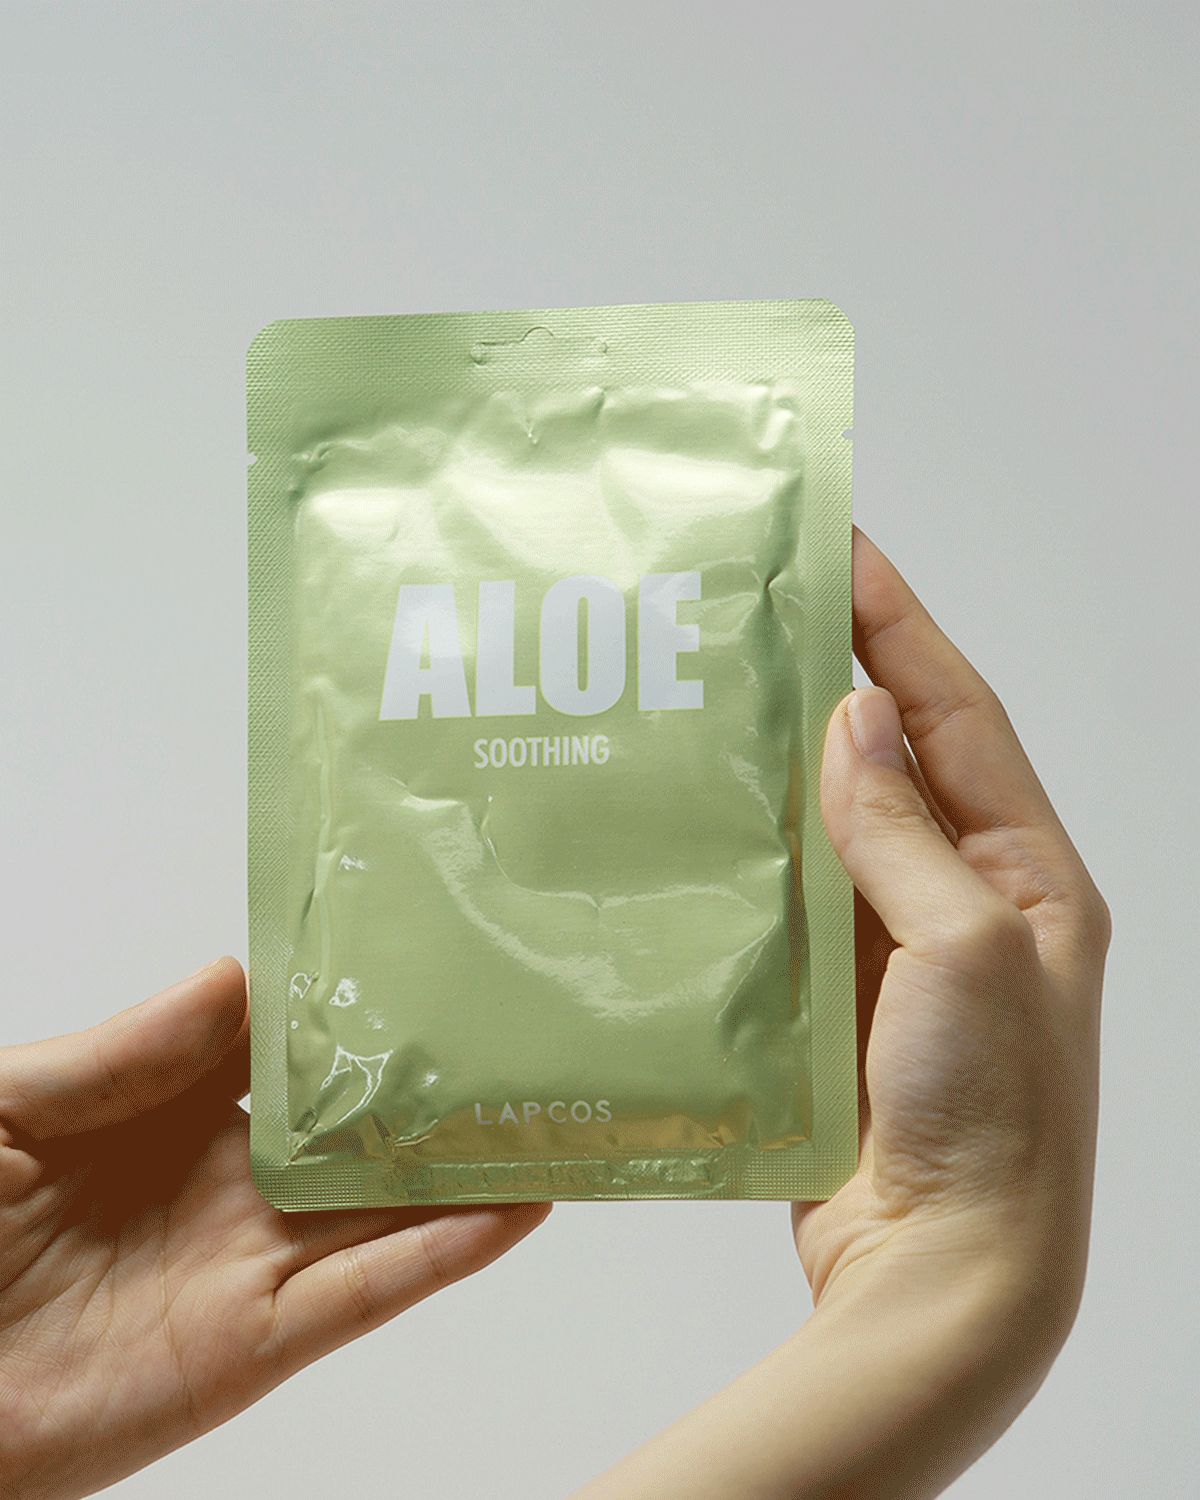 Model opens an Aloe Soothing mask packet, removes the mask, and unfolds it